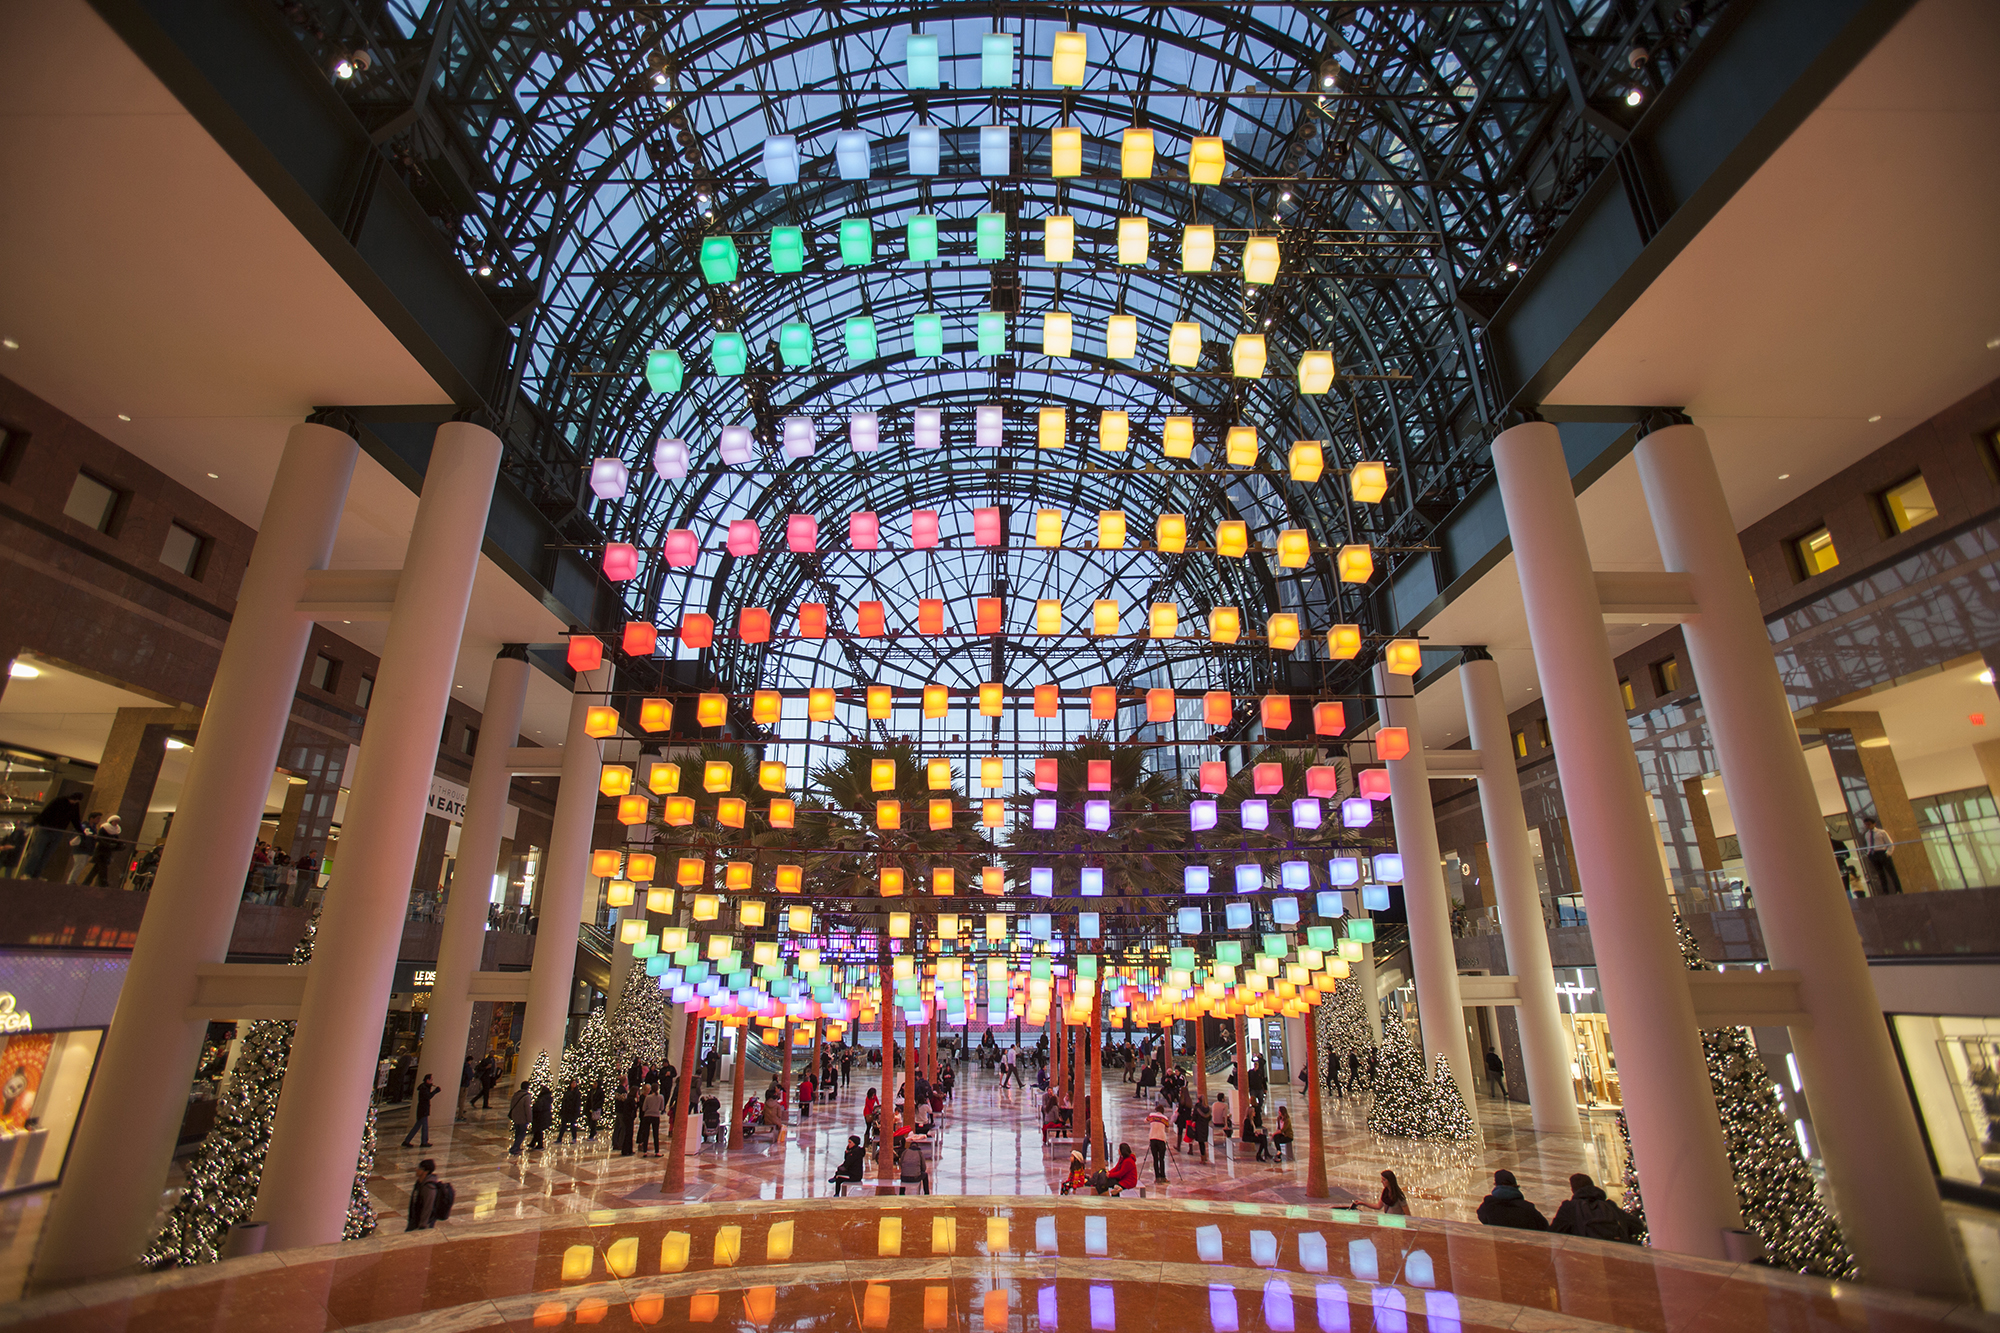 Top 11 Things to Do in Brookfield Place NYC